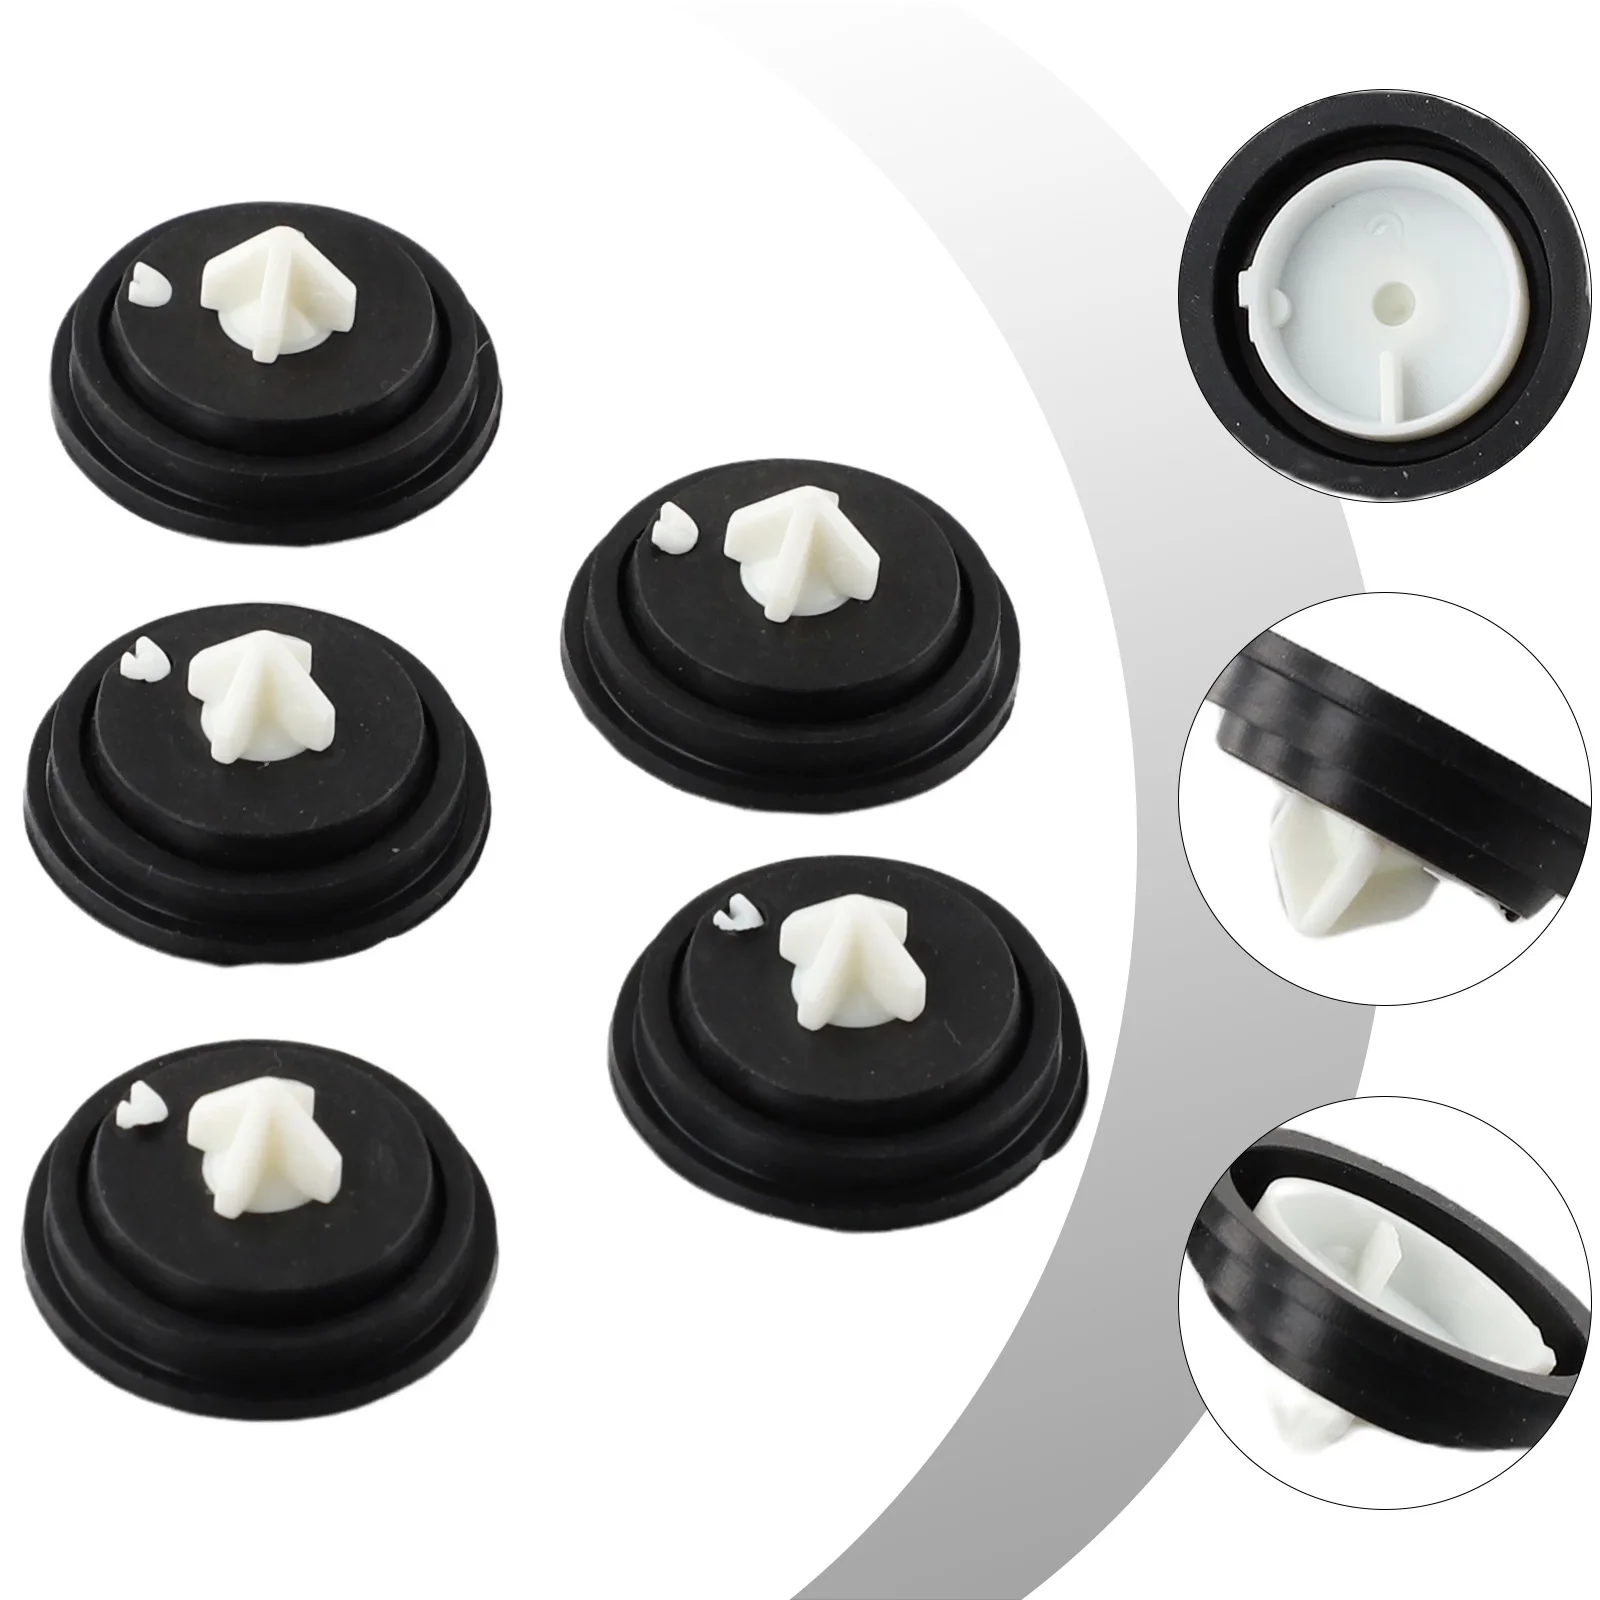 

5pc 28x12.3mm Gasket Seals Inlet Float Valve Replacement Rubber Diaphragm Washer Fits All Siamp Fill Valves Ballvalve